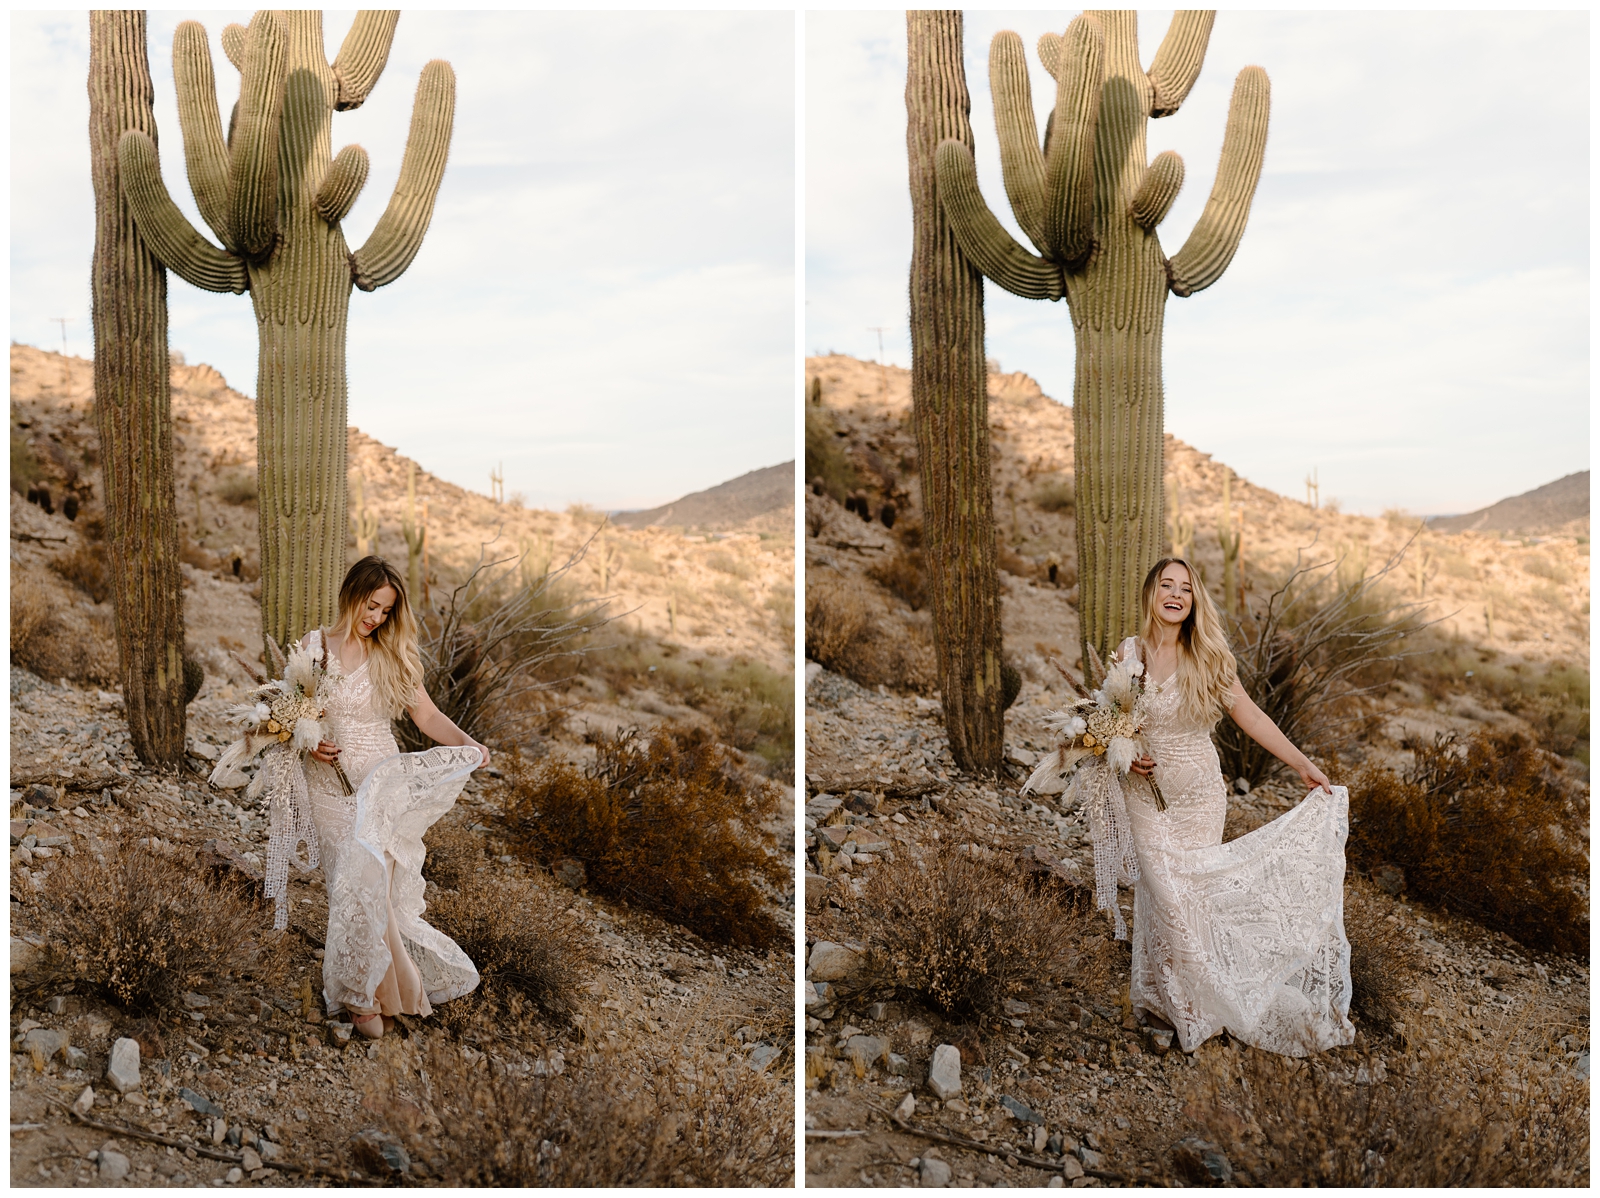 Gorgeous bridal session with tall cacti at Arizona's South Mountain Park by adventurous elopement photographer